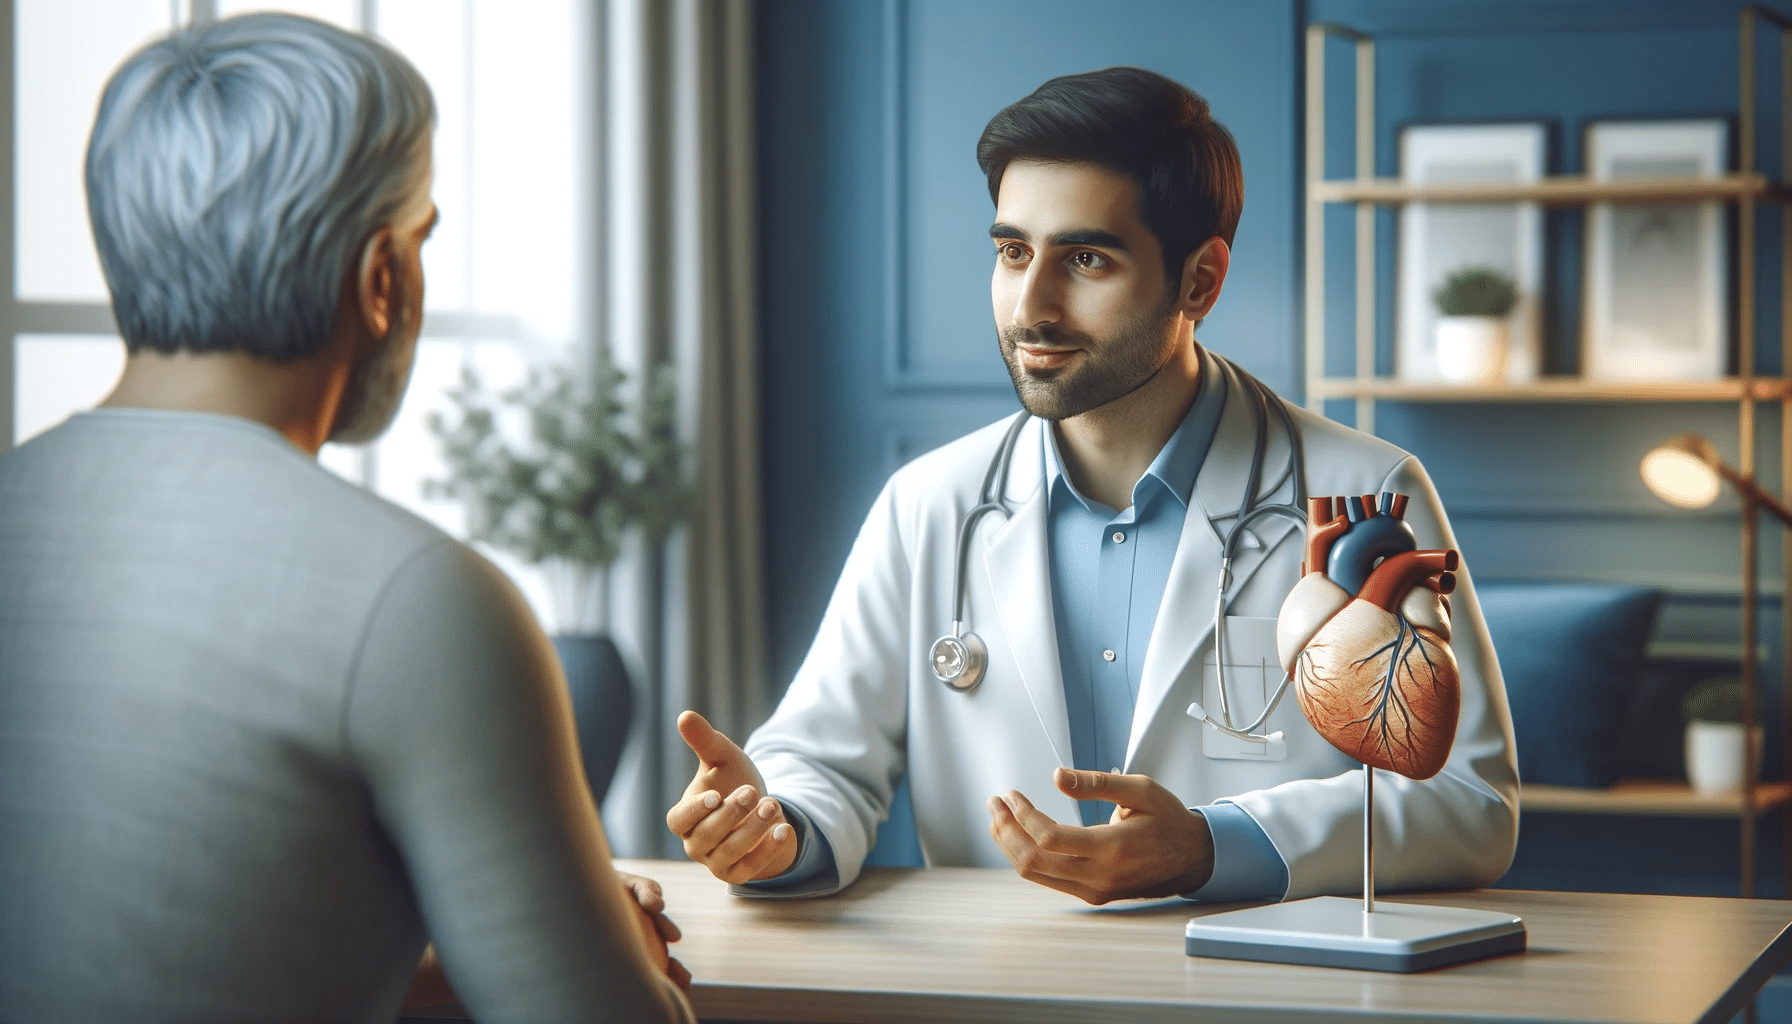 DALL·E 2023 12 02 22.14.43 Image 4 A realistic photo showing a medical consultation for chest pain. It features a sympathetic 30 year old doctor of Middle Eastern descent wea